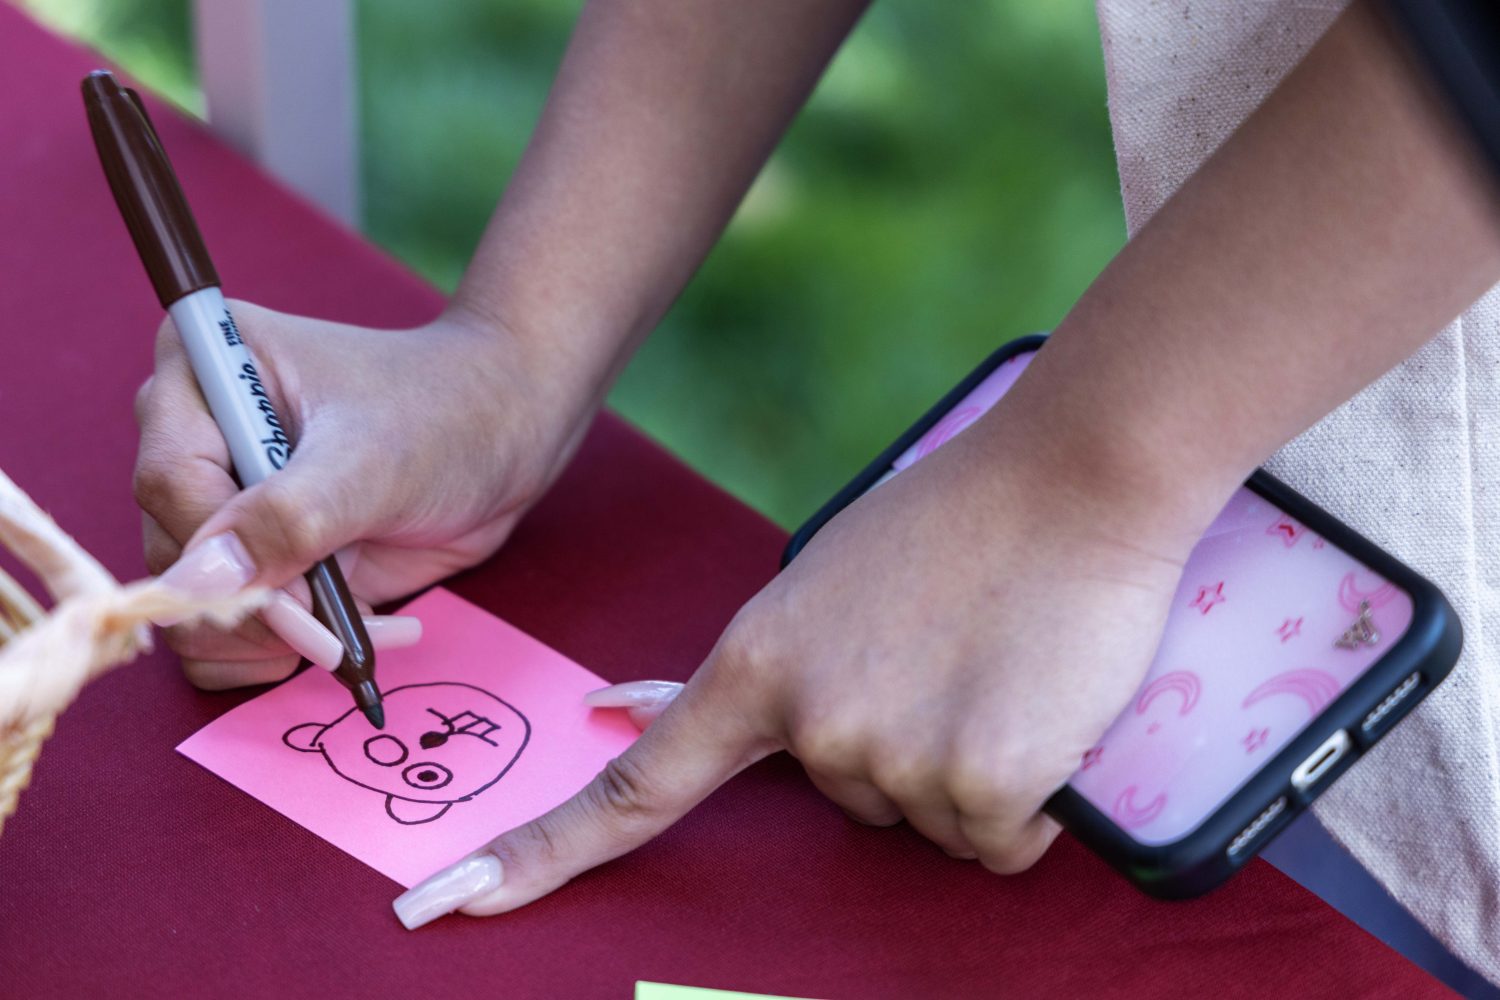 Students draw pictures of gopher's for a prize during Welcome Week. (Photo/Adria Carpenter)